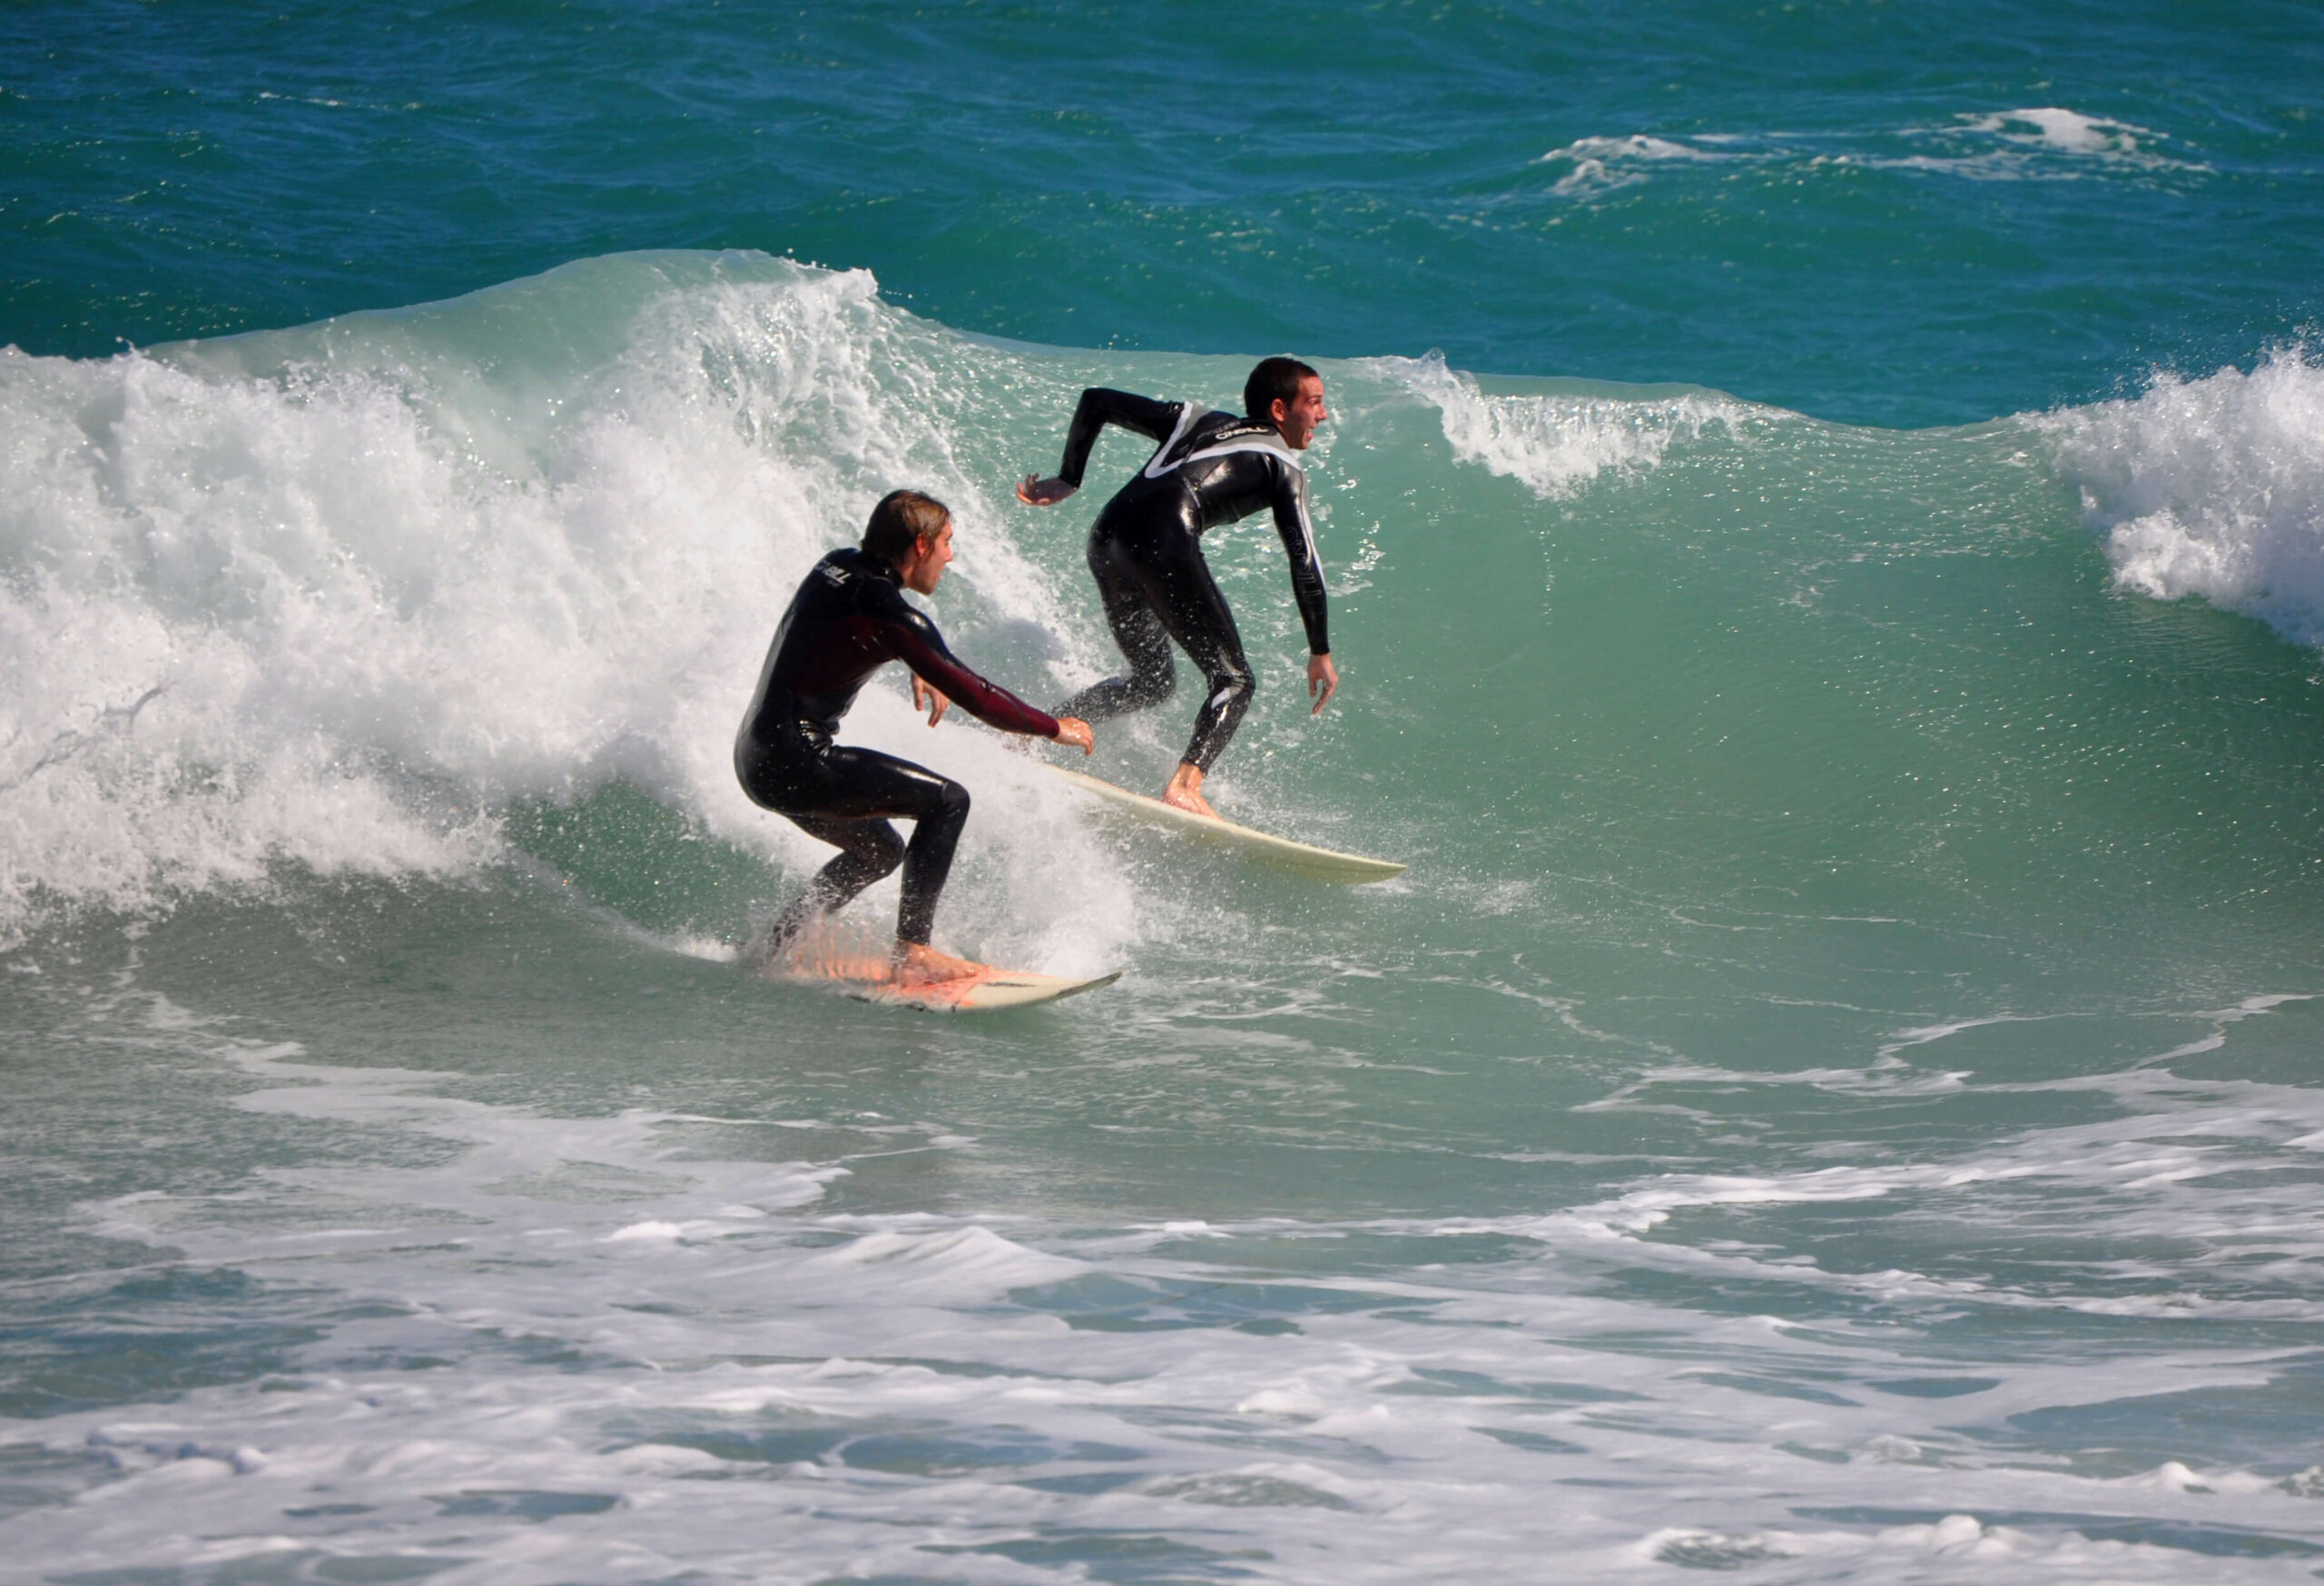 Surfing at Jetty Park in Cape Canaveral